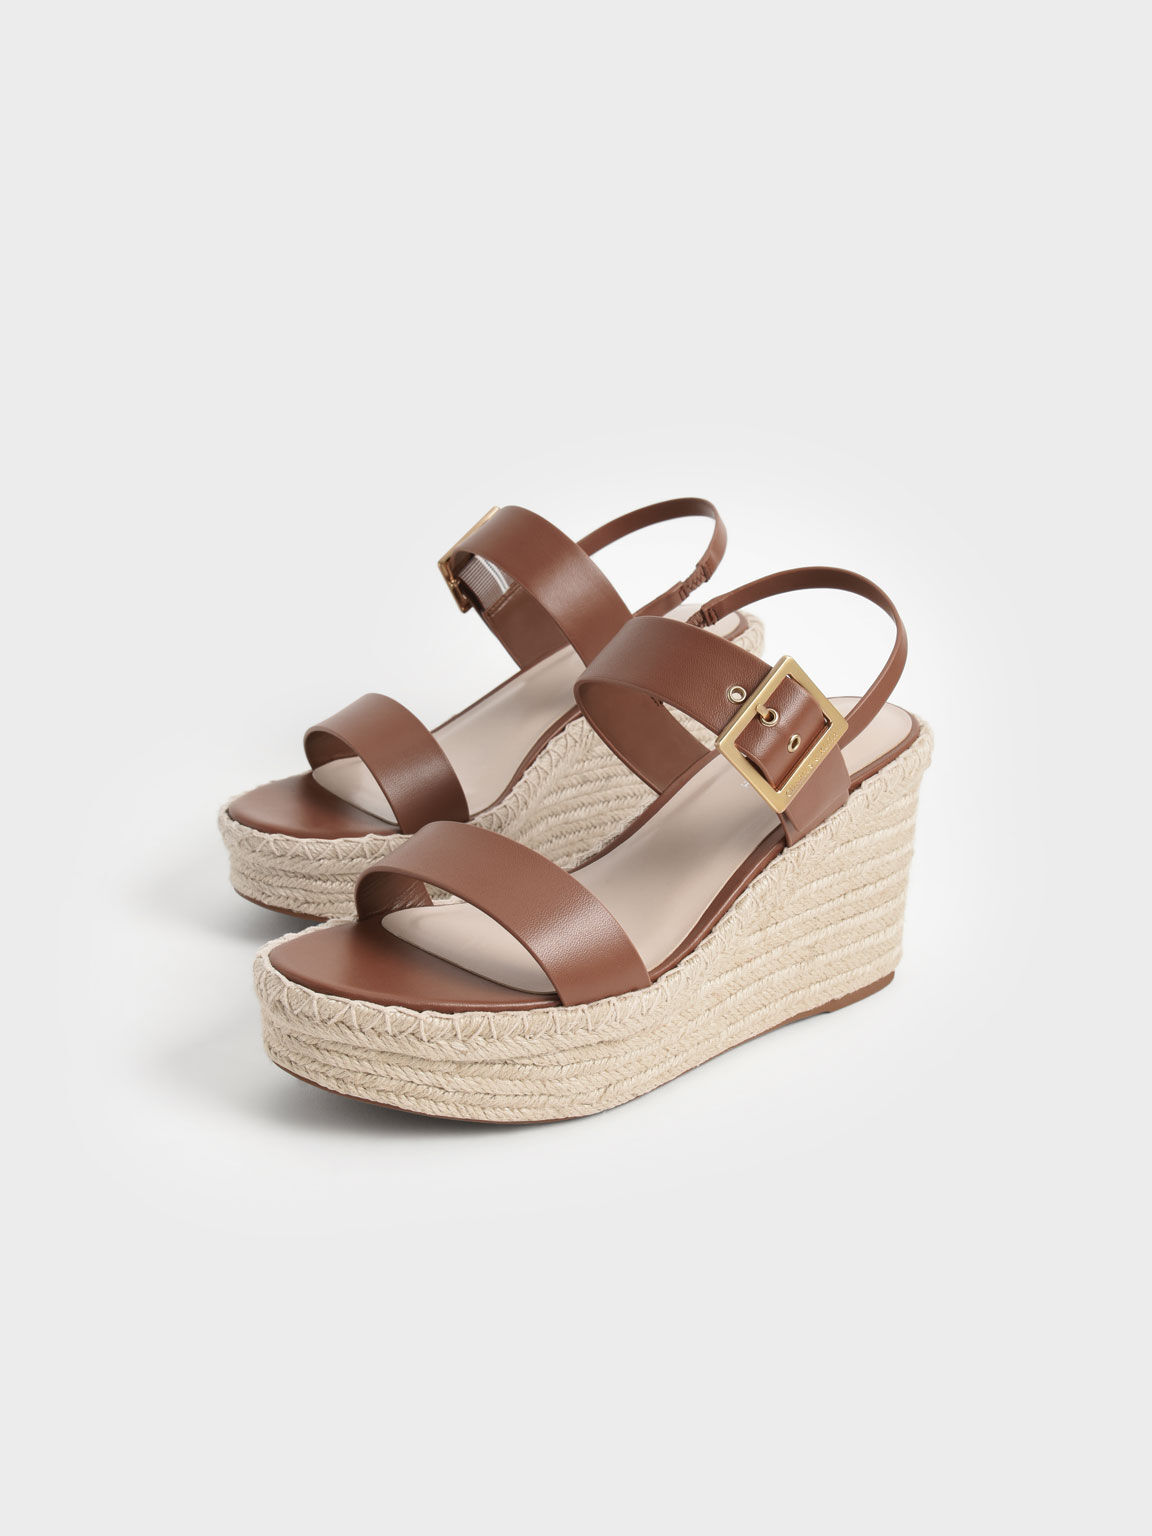 Buy Trary Wedge Sandals for Women,Comfortable Wedges for Women,Sandals for  Women Dressy Summer,Hollowed-out Brown Sandals Womens,3.5 inch Brown Wedges  for Women,Cute Open Toe Sandals for Women Size 8 Online at Lowest Price